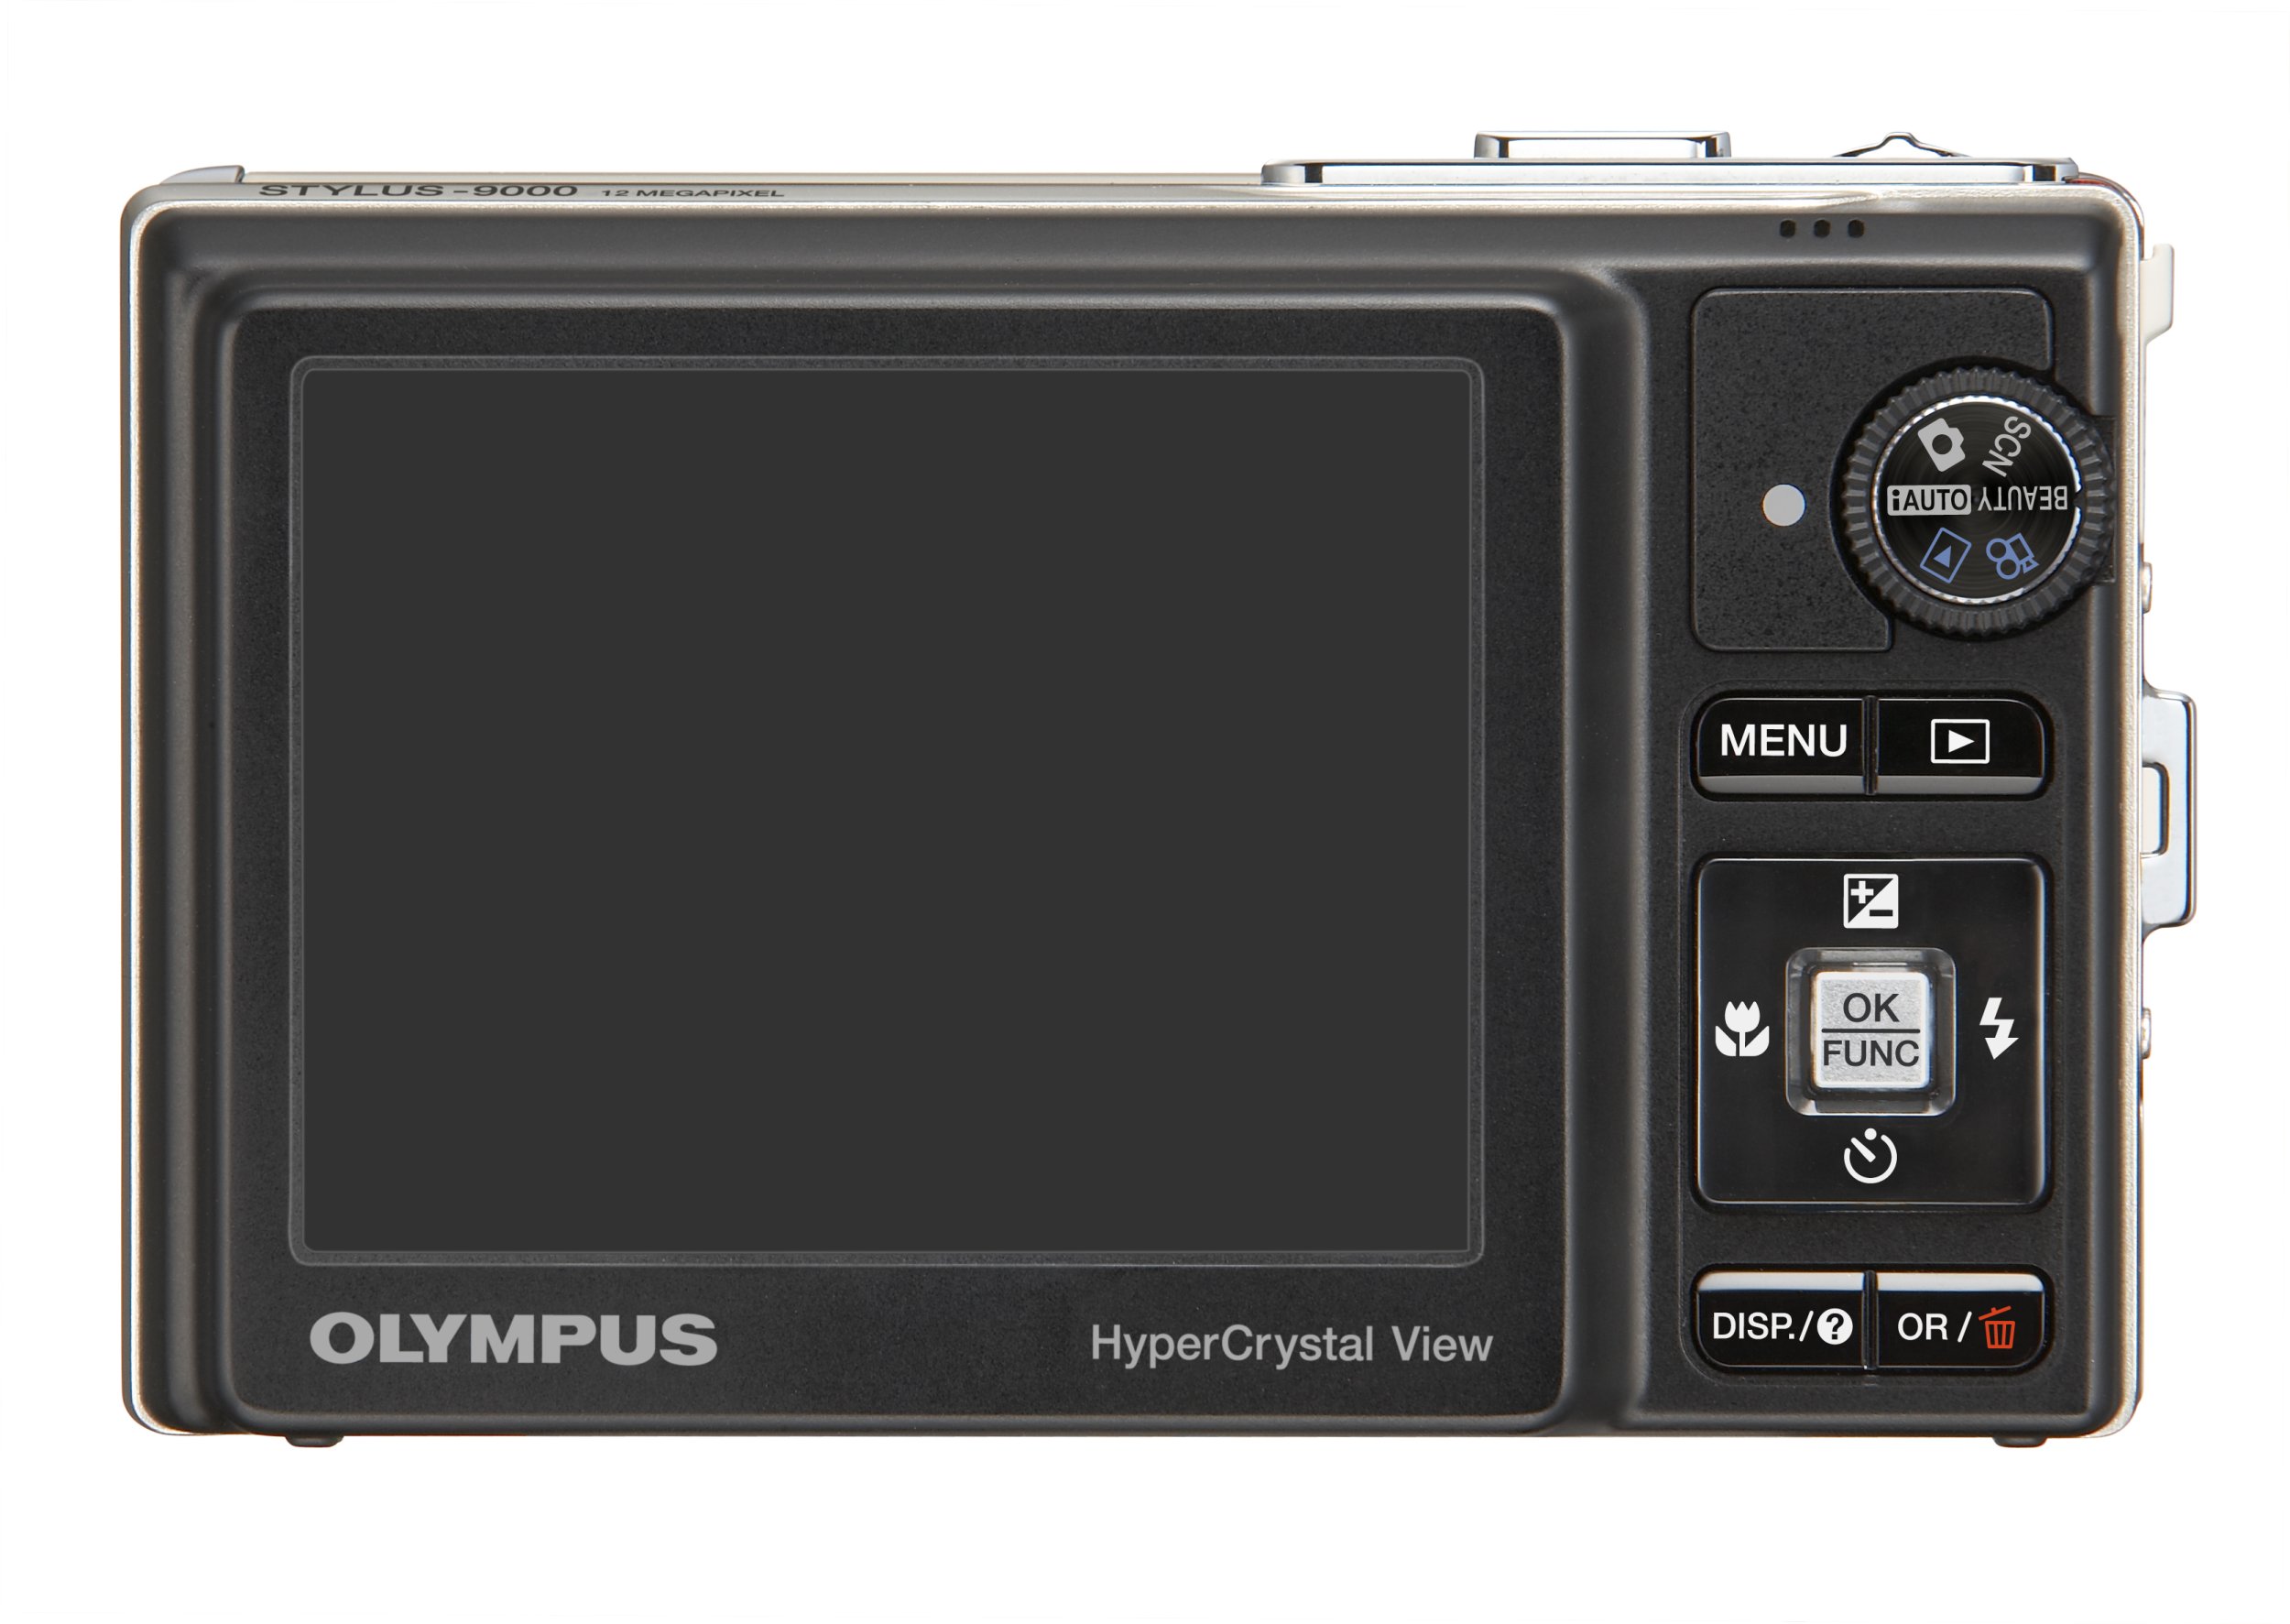 OM SYSTEM OLYMPUS Stylus 9000 12 MP Digital Camera with 10x Wide Angle Optical Dual Image Stabilized Zoom and 2.7-Inch LCD (Champagne)